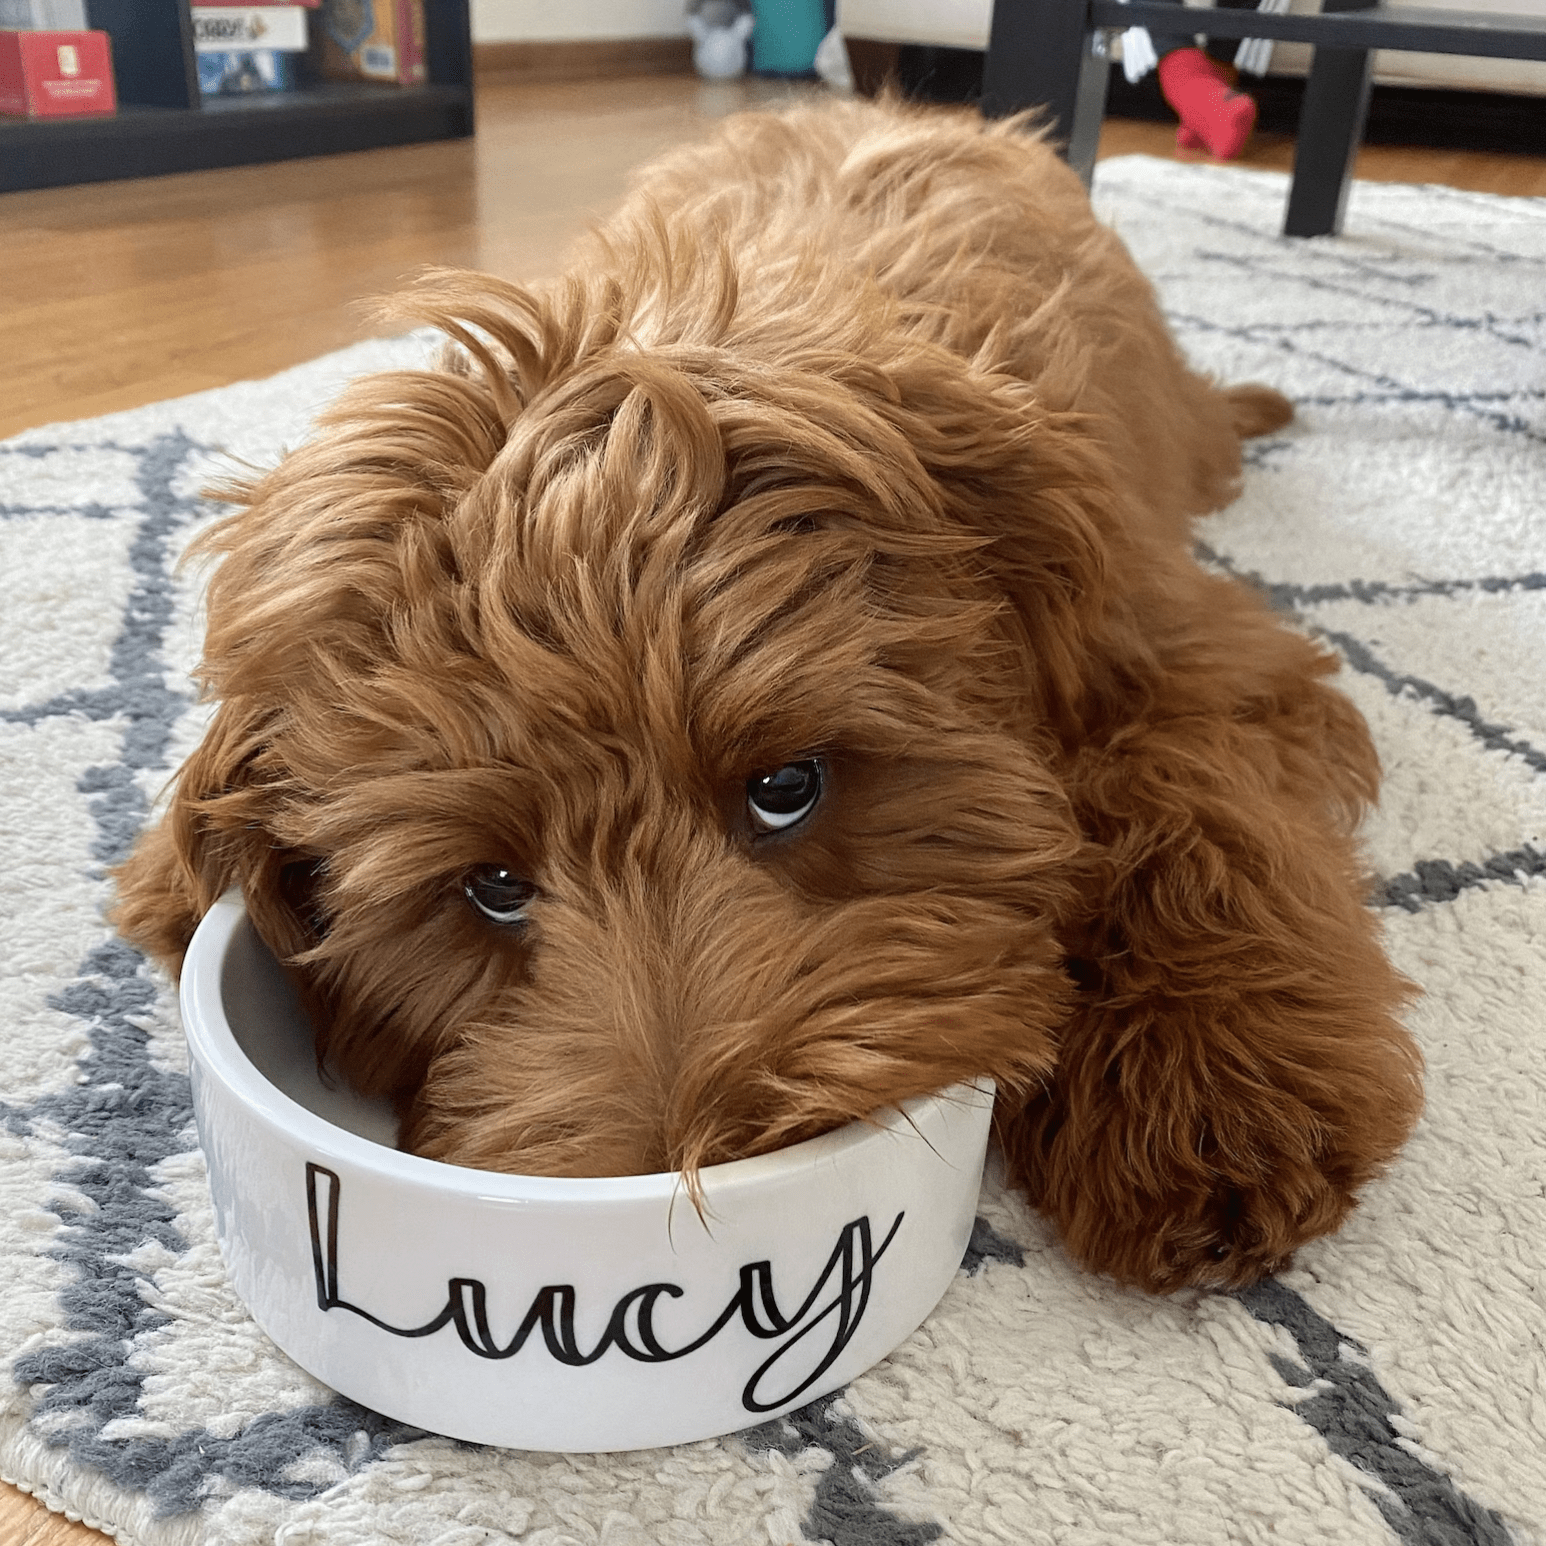 13 Best Custom And Personalized Pet Gifts Every Dog Owner Will Love - DJANGO